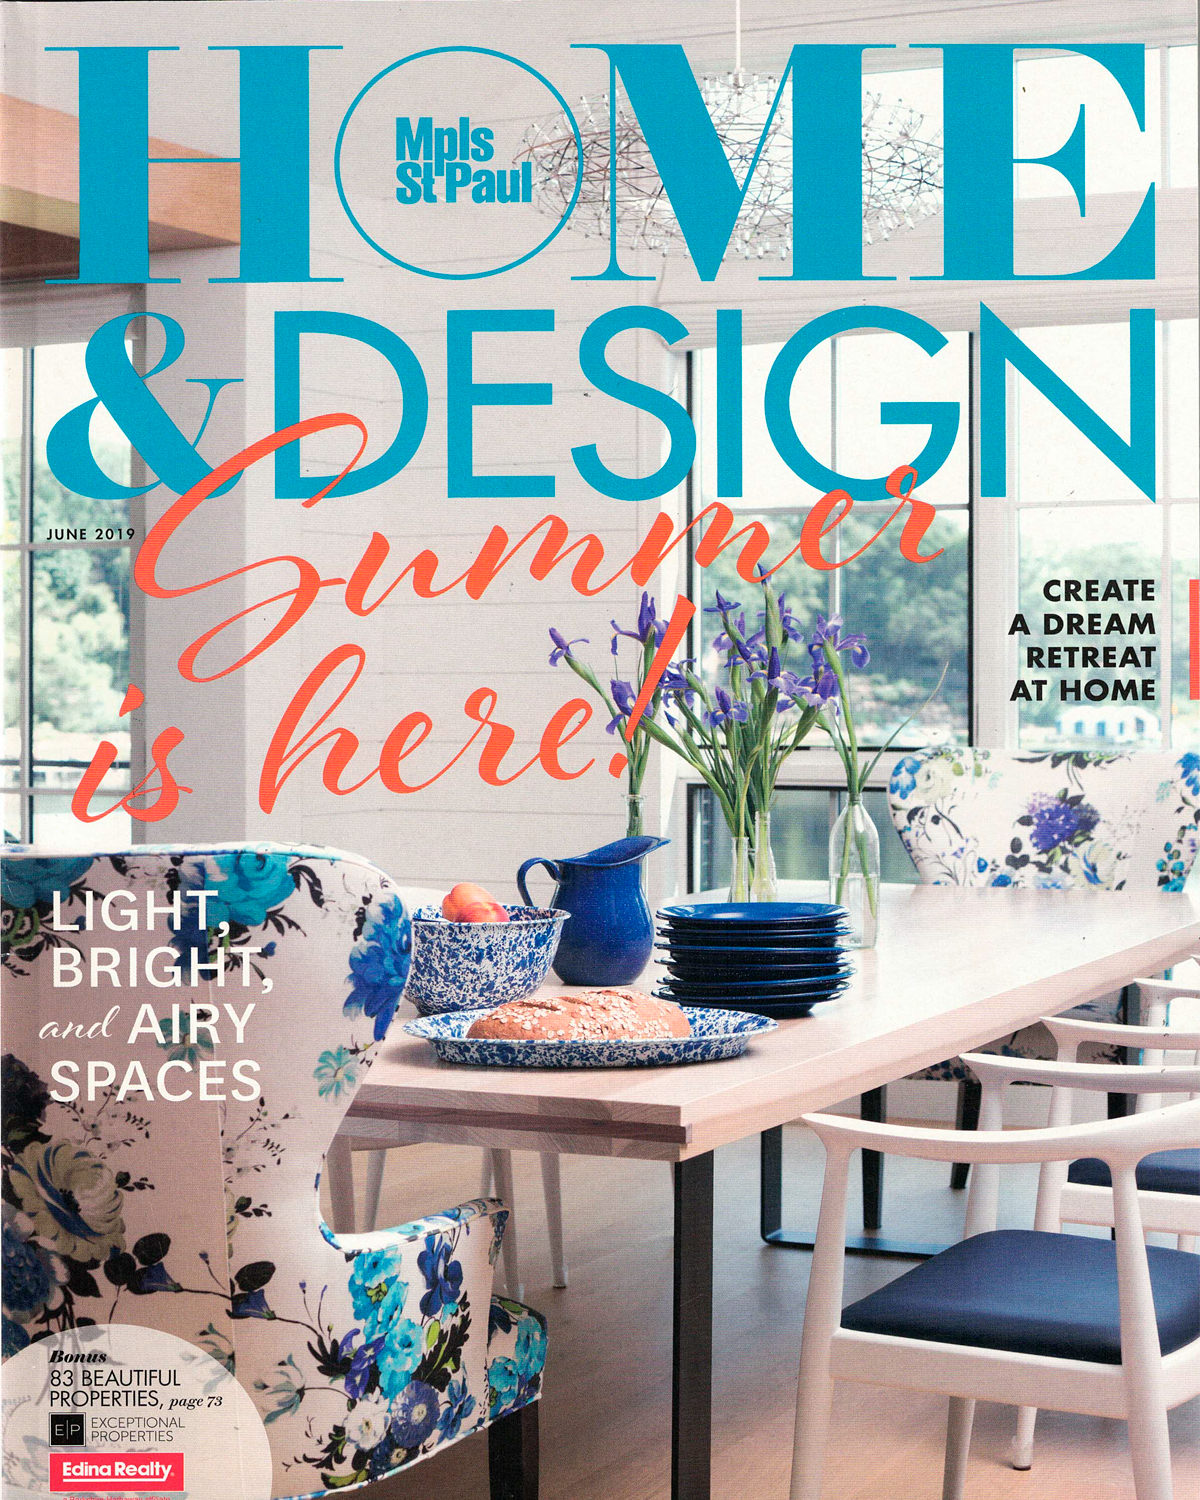 LiLu Interiors featured in Mpls.St.Paul Magazine 2019